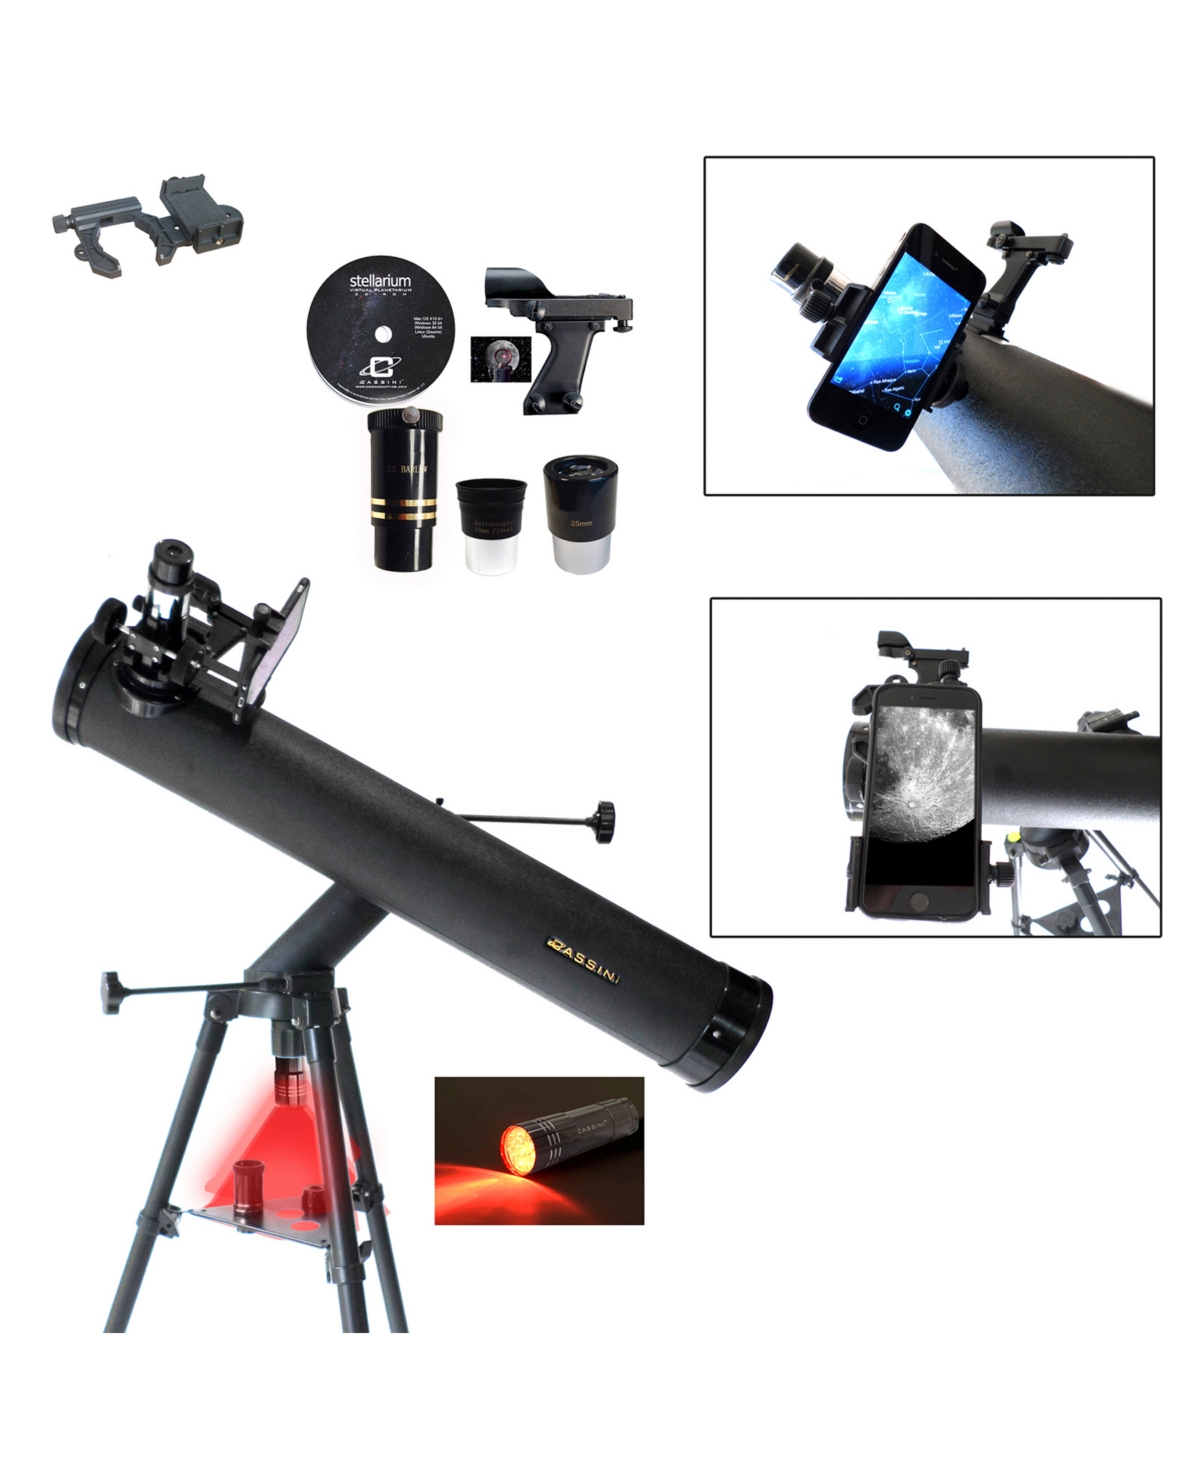 Cassini 800 X 80 Telescope With Red Led Observation Light And Smartphone Adapter In Black